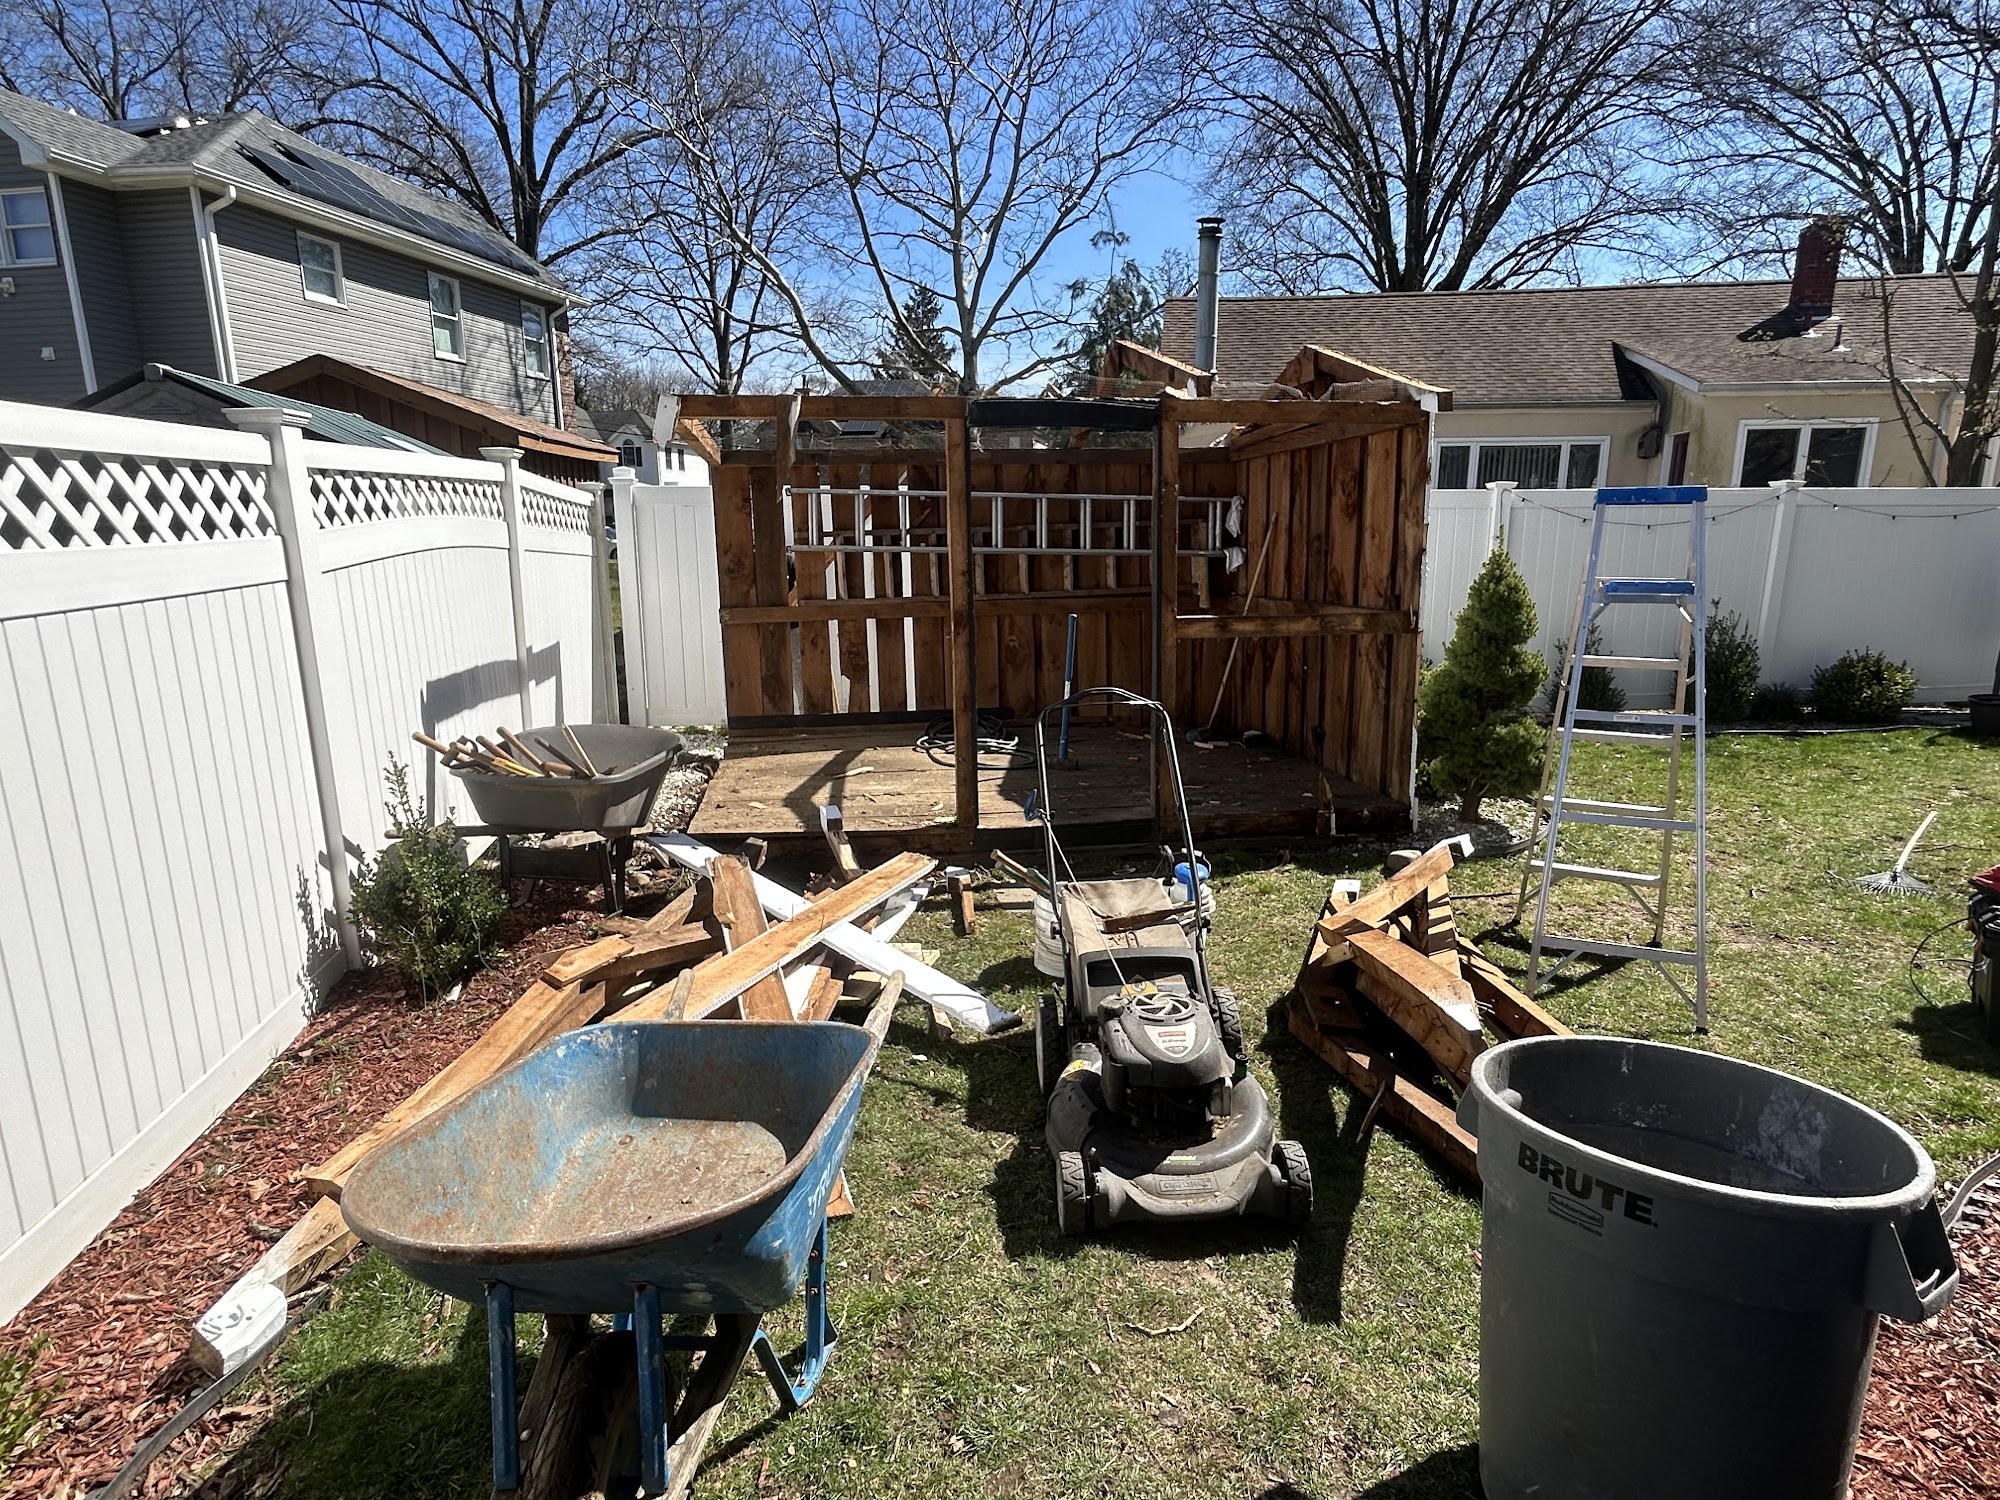 PJ'S Cleanouts - Junk Removal & Demolition Services 2 Forest Ave, Oradell New Jersey 07649